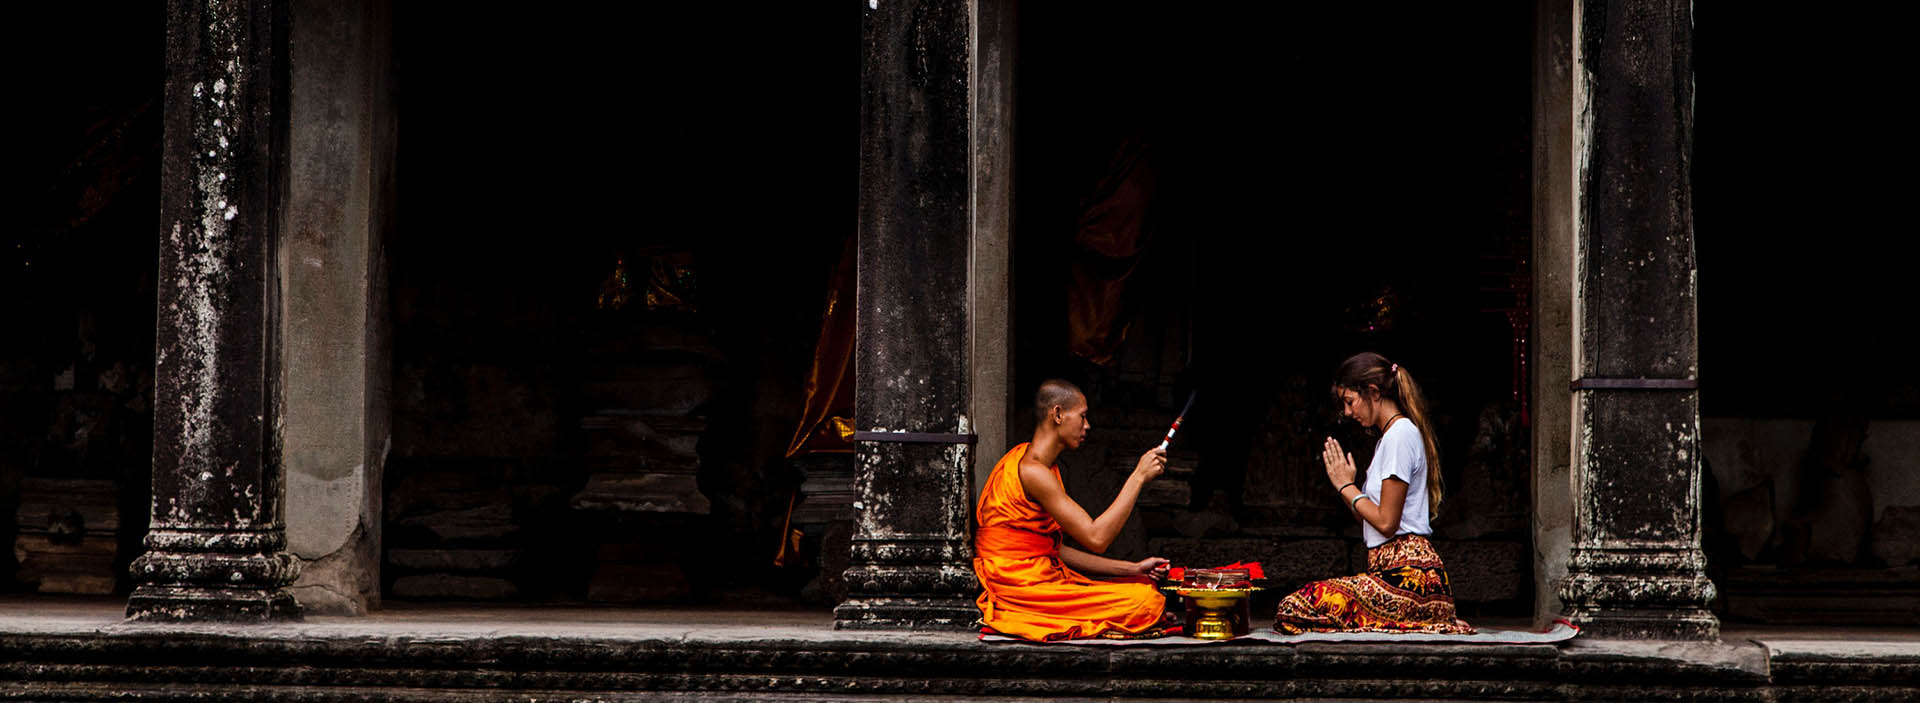 Woman sitting in front of monk